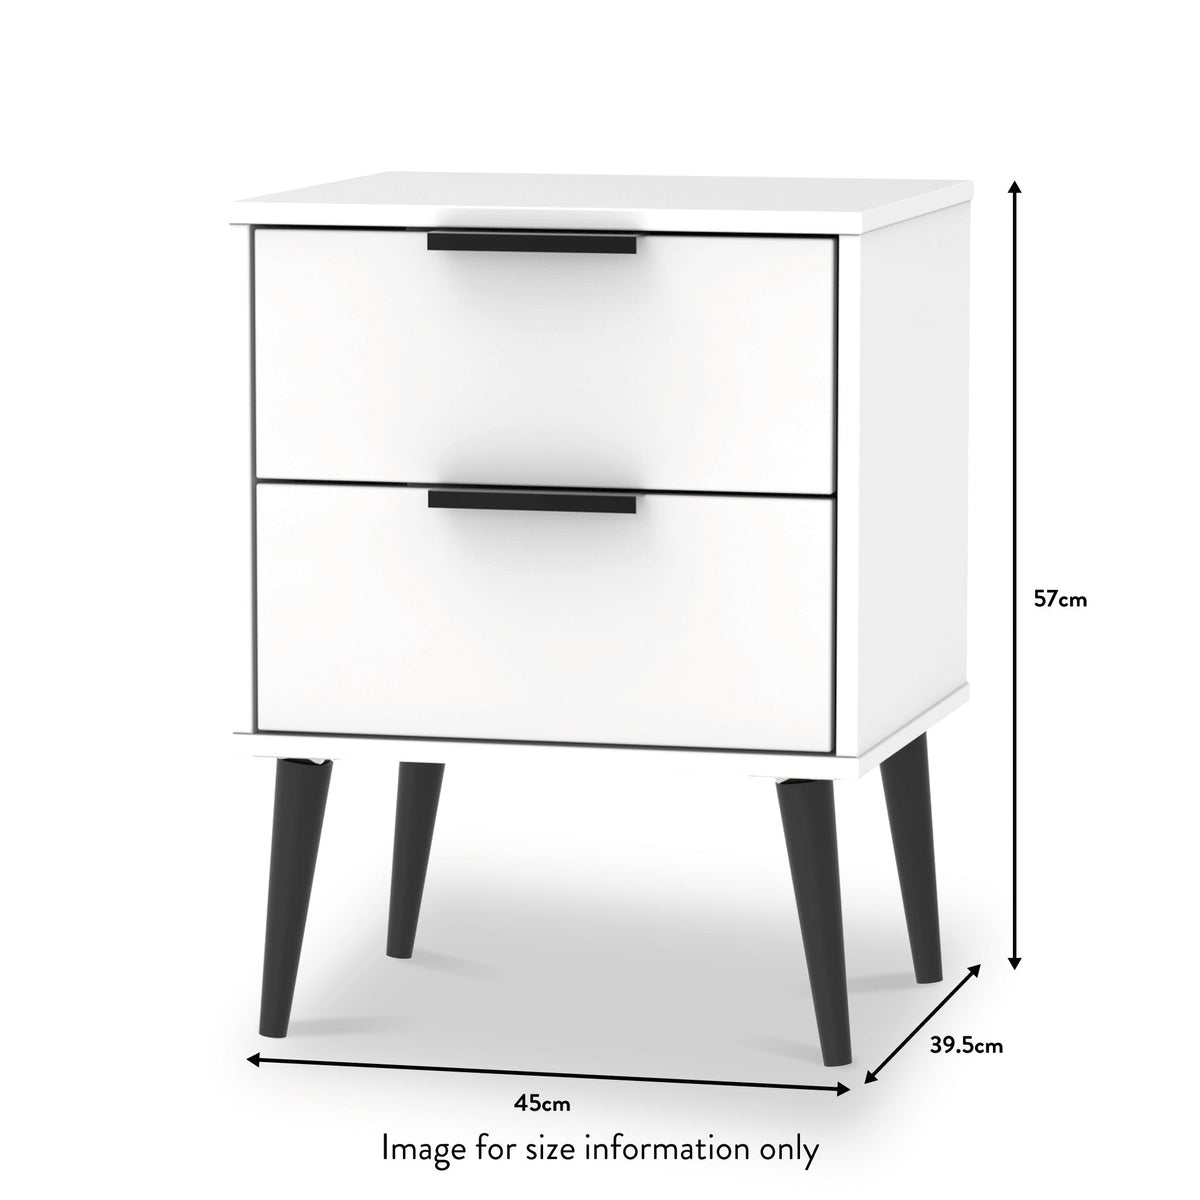 Asher White 2 Drawer Bedside Table dimensions